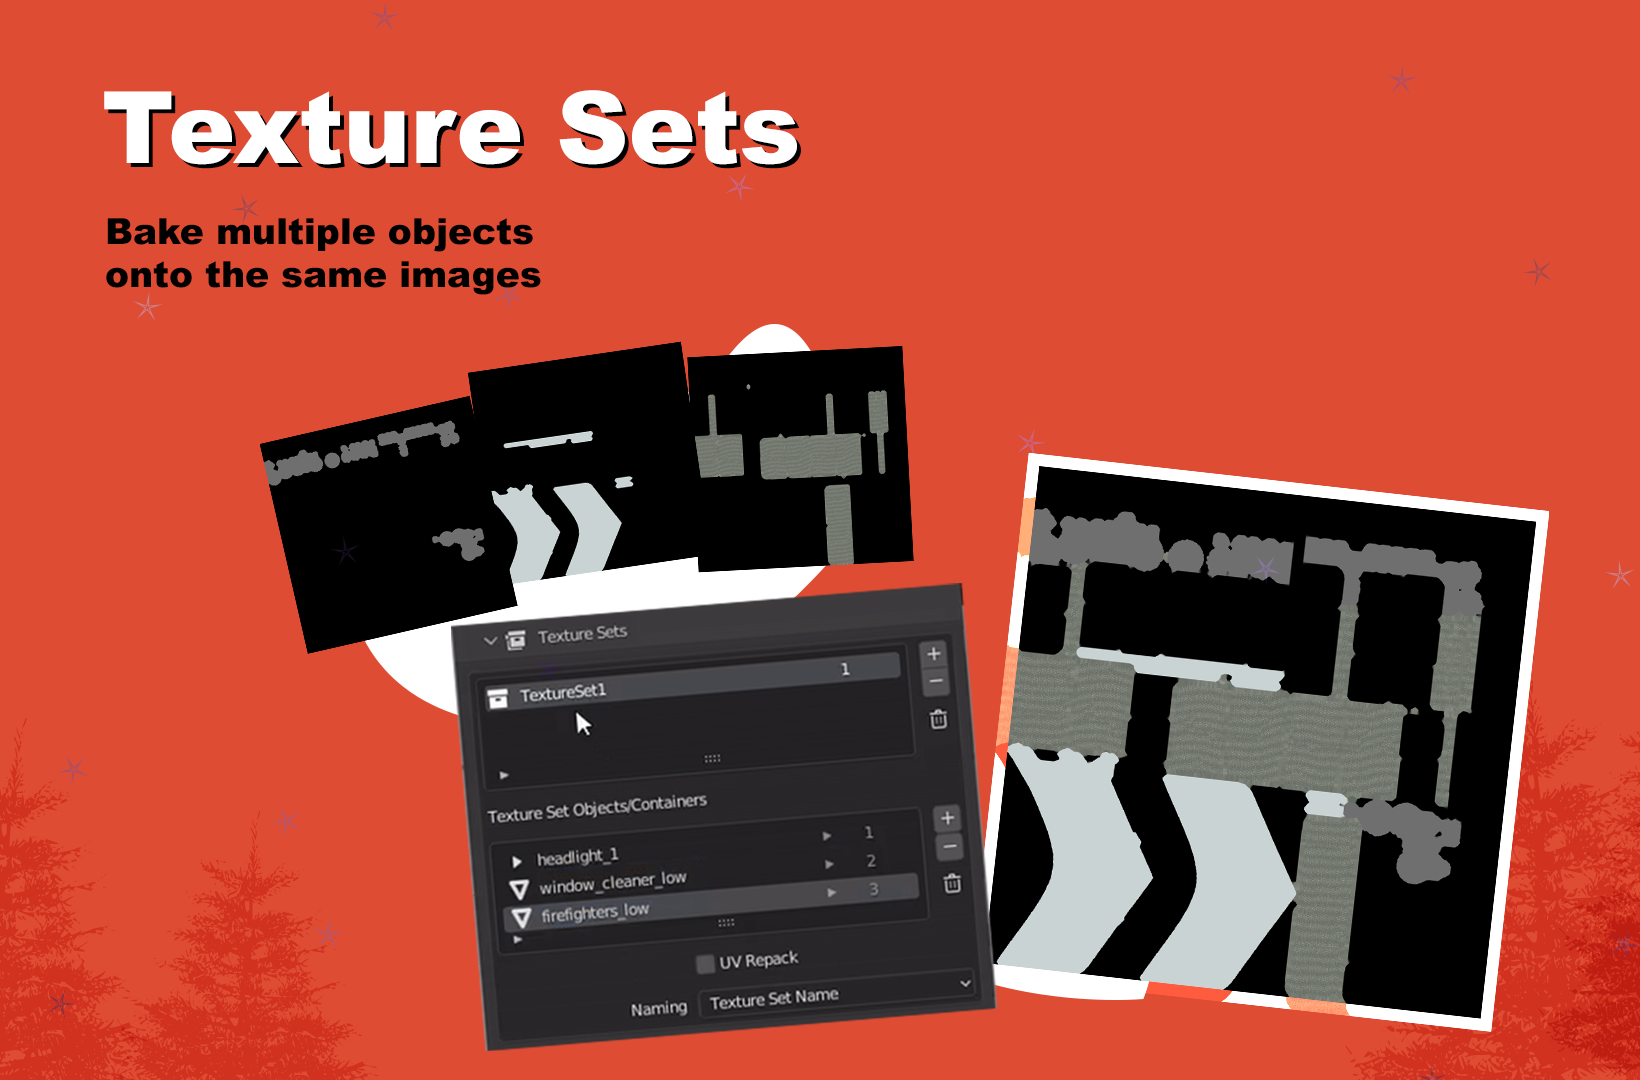 Texture Sets. Bake multiple objects onto the same images